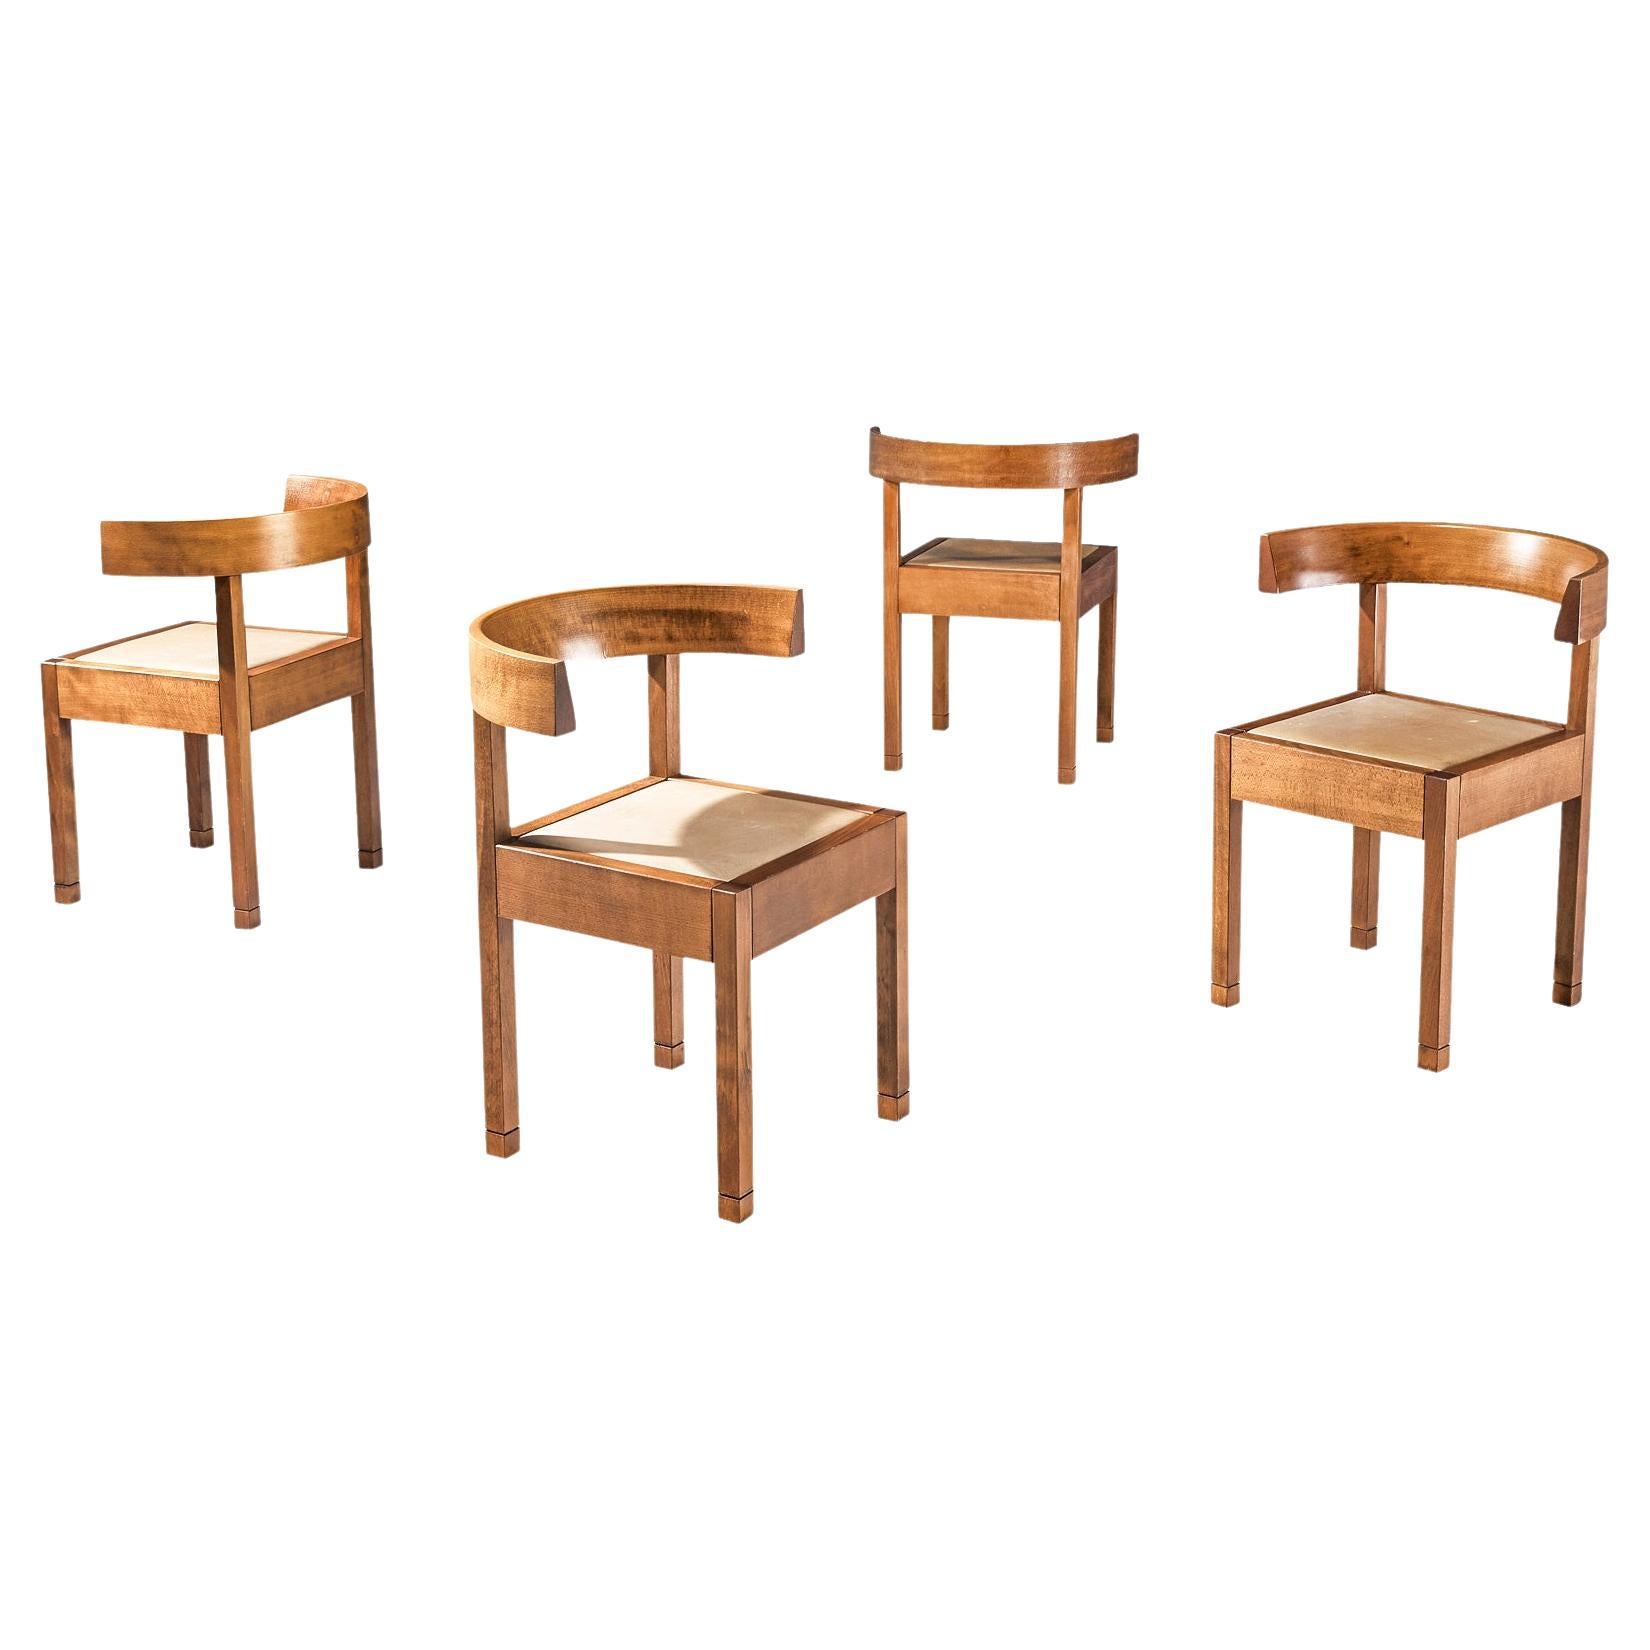 Oswald Mathias Ungers for Draenert Set of Four Dining Chairs